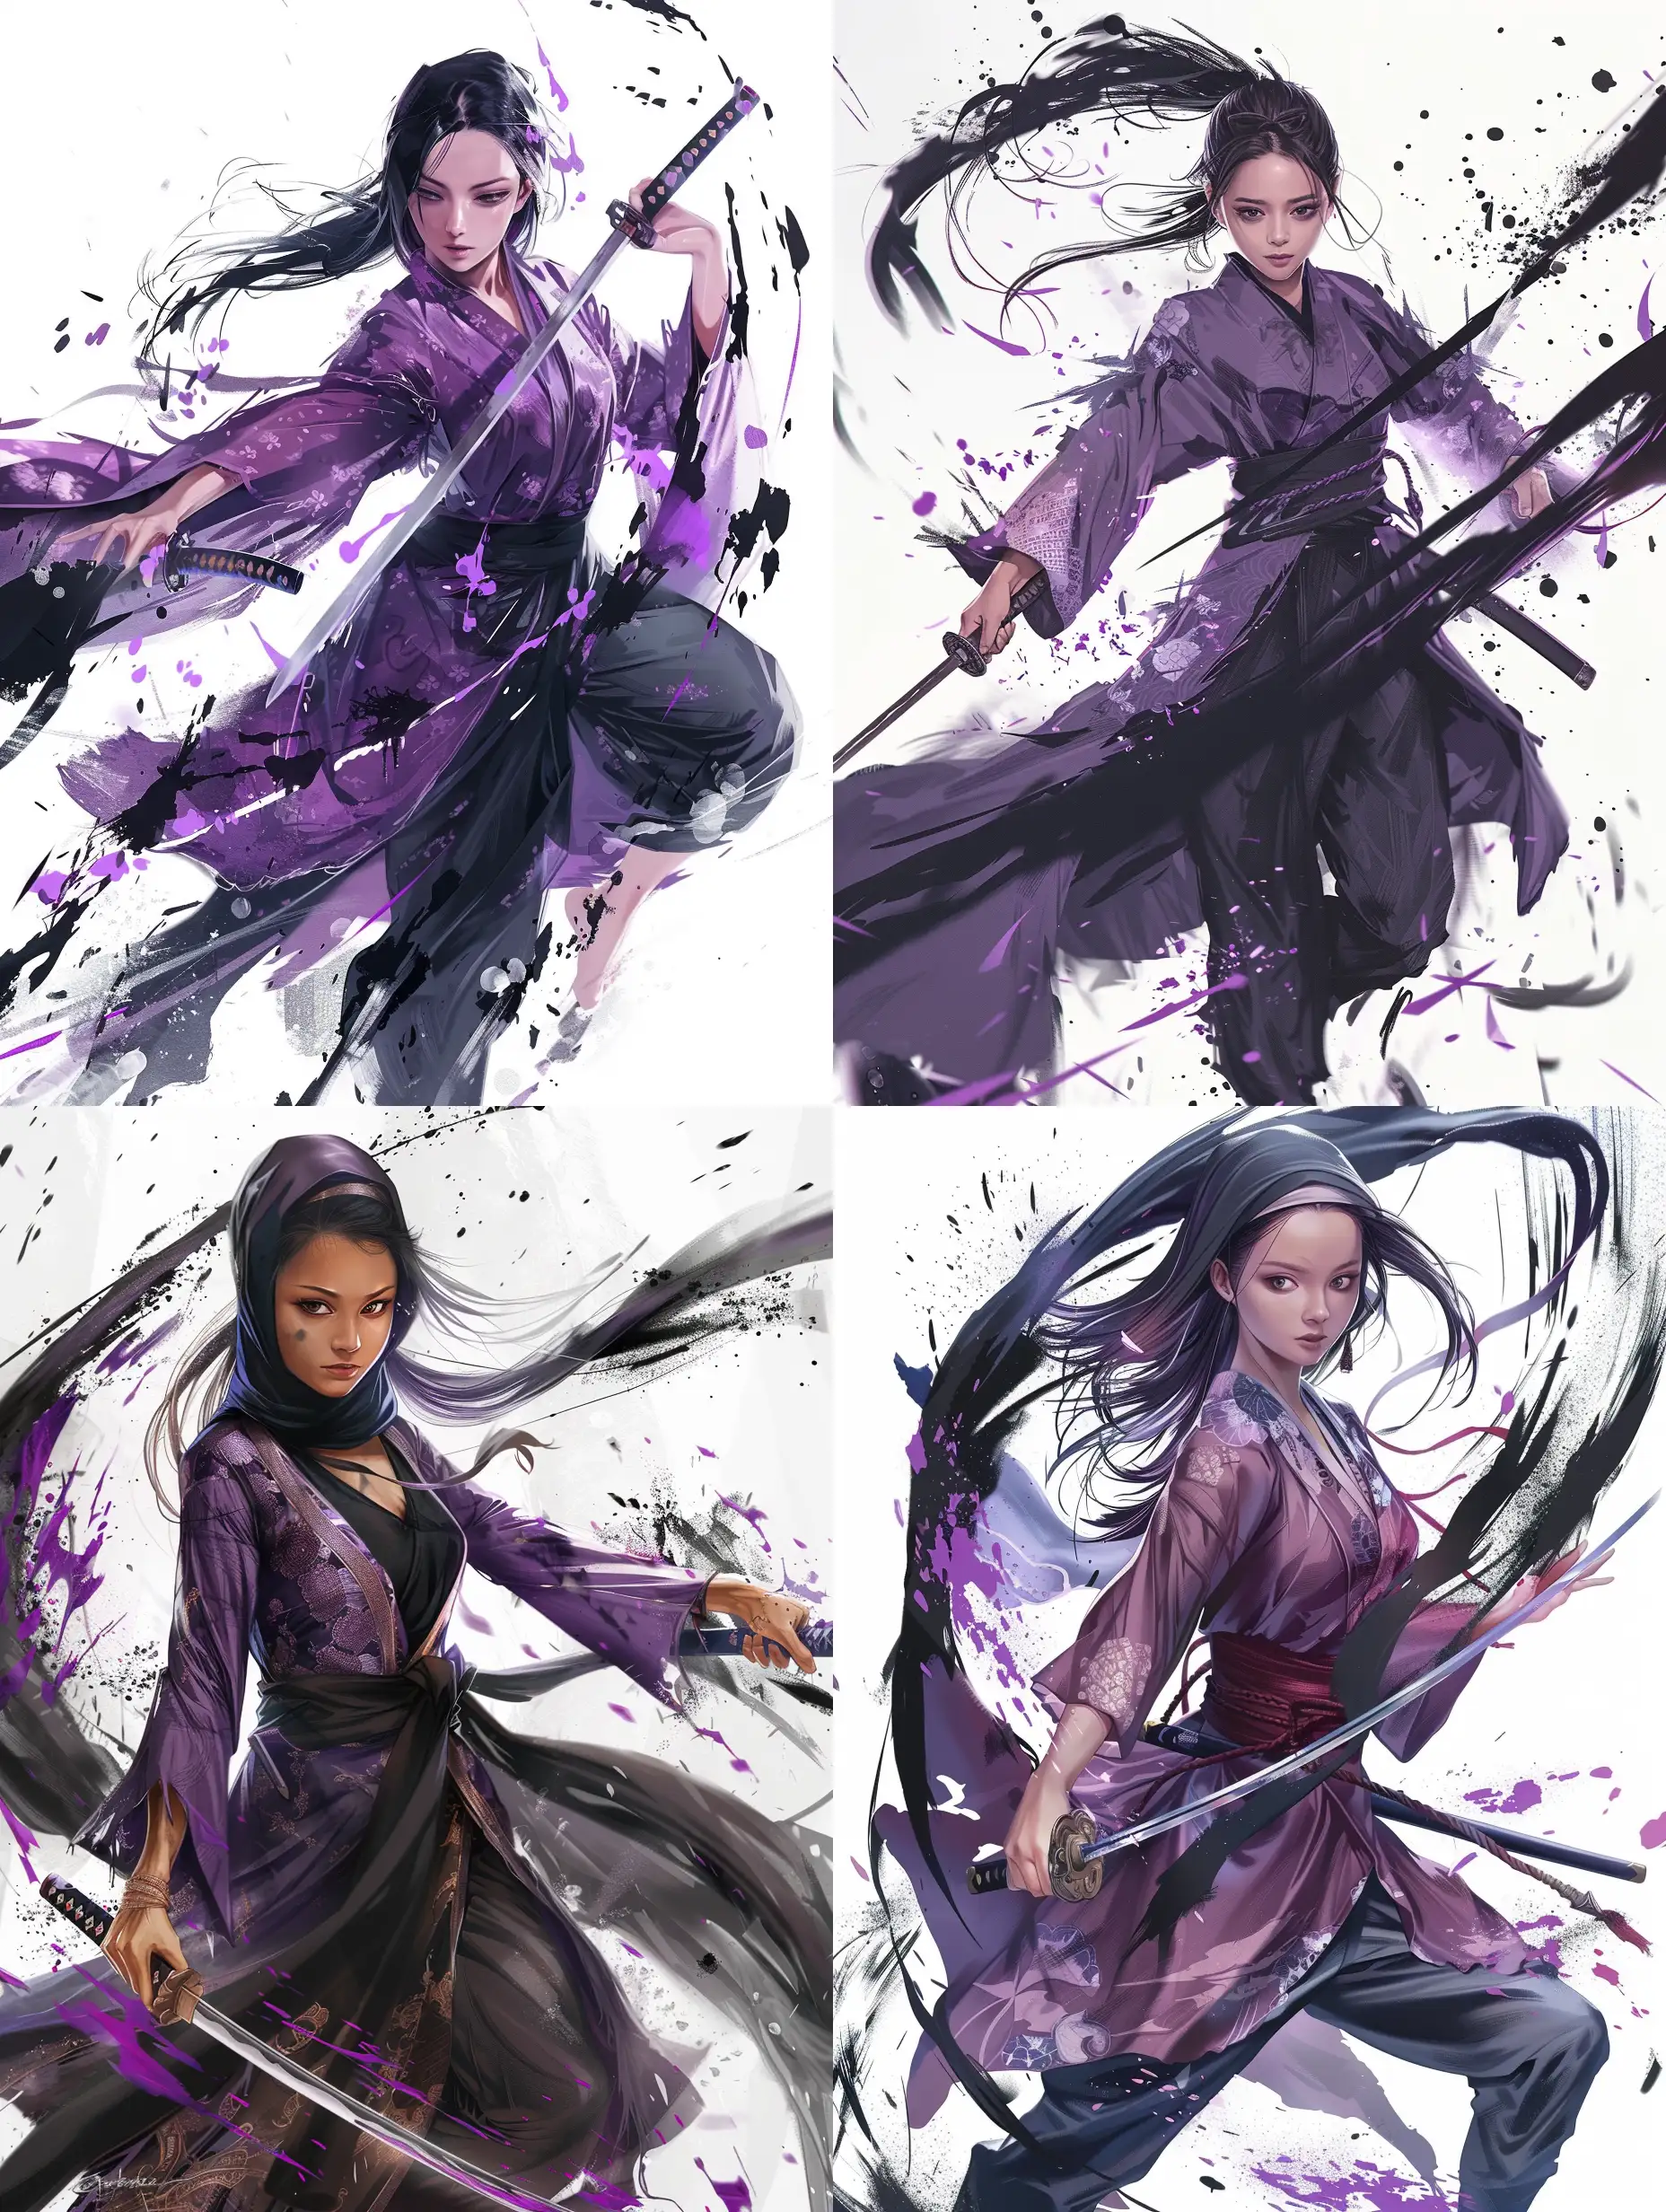 long black tudung beautiful girl wears a fit clothes with a purple kimono, katana in her hand, purple and black energy floats around her, dynamic pose, fight pose, manga style art